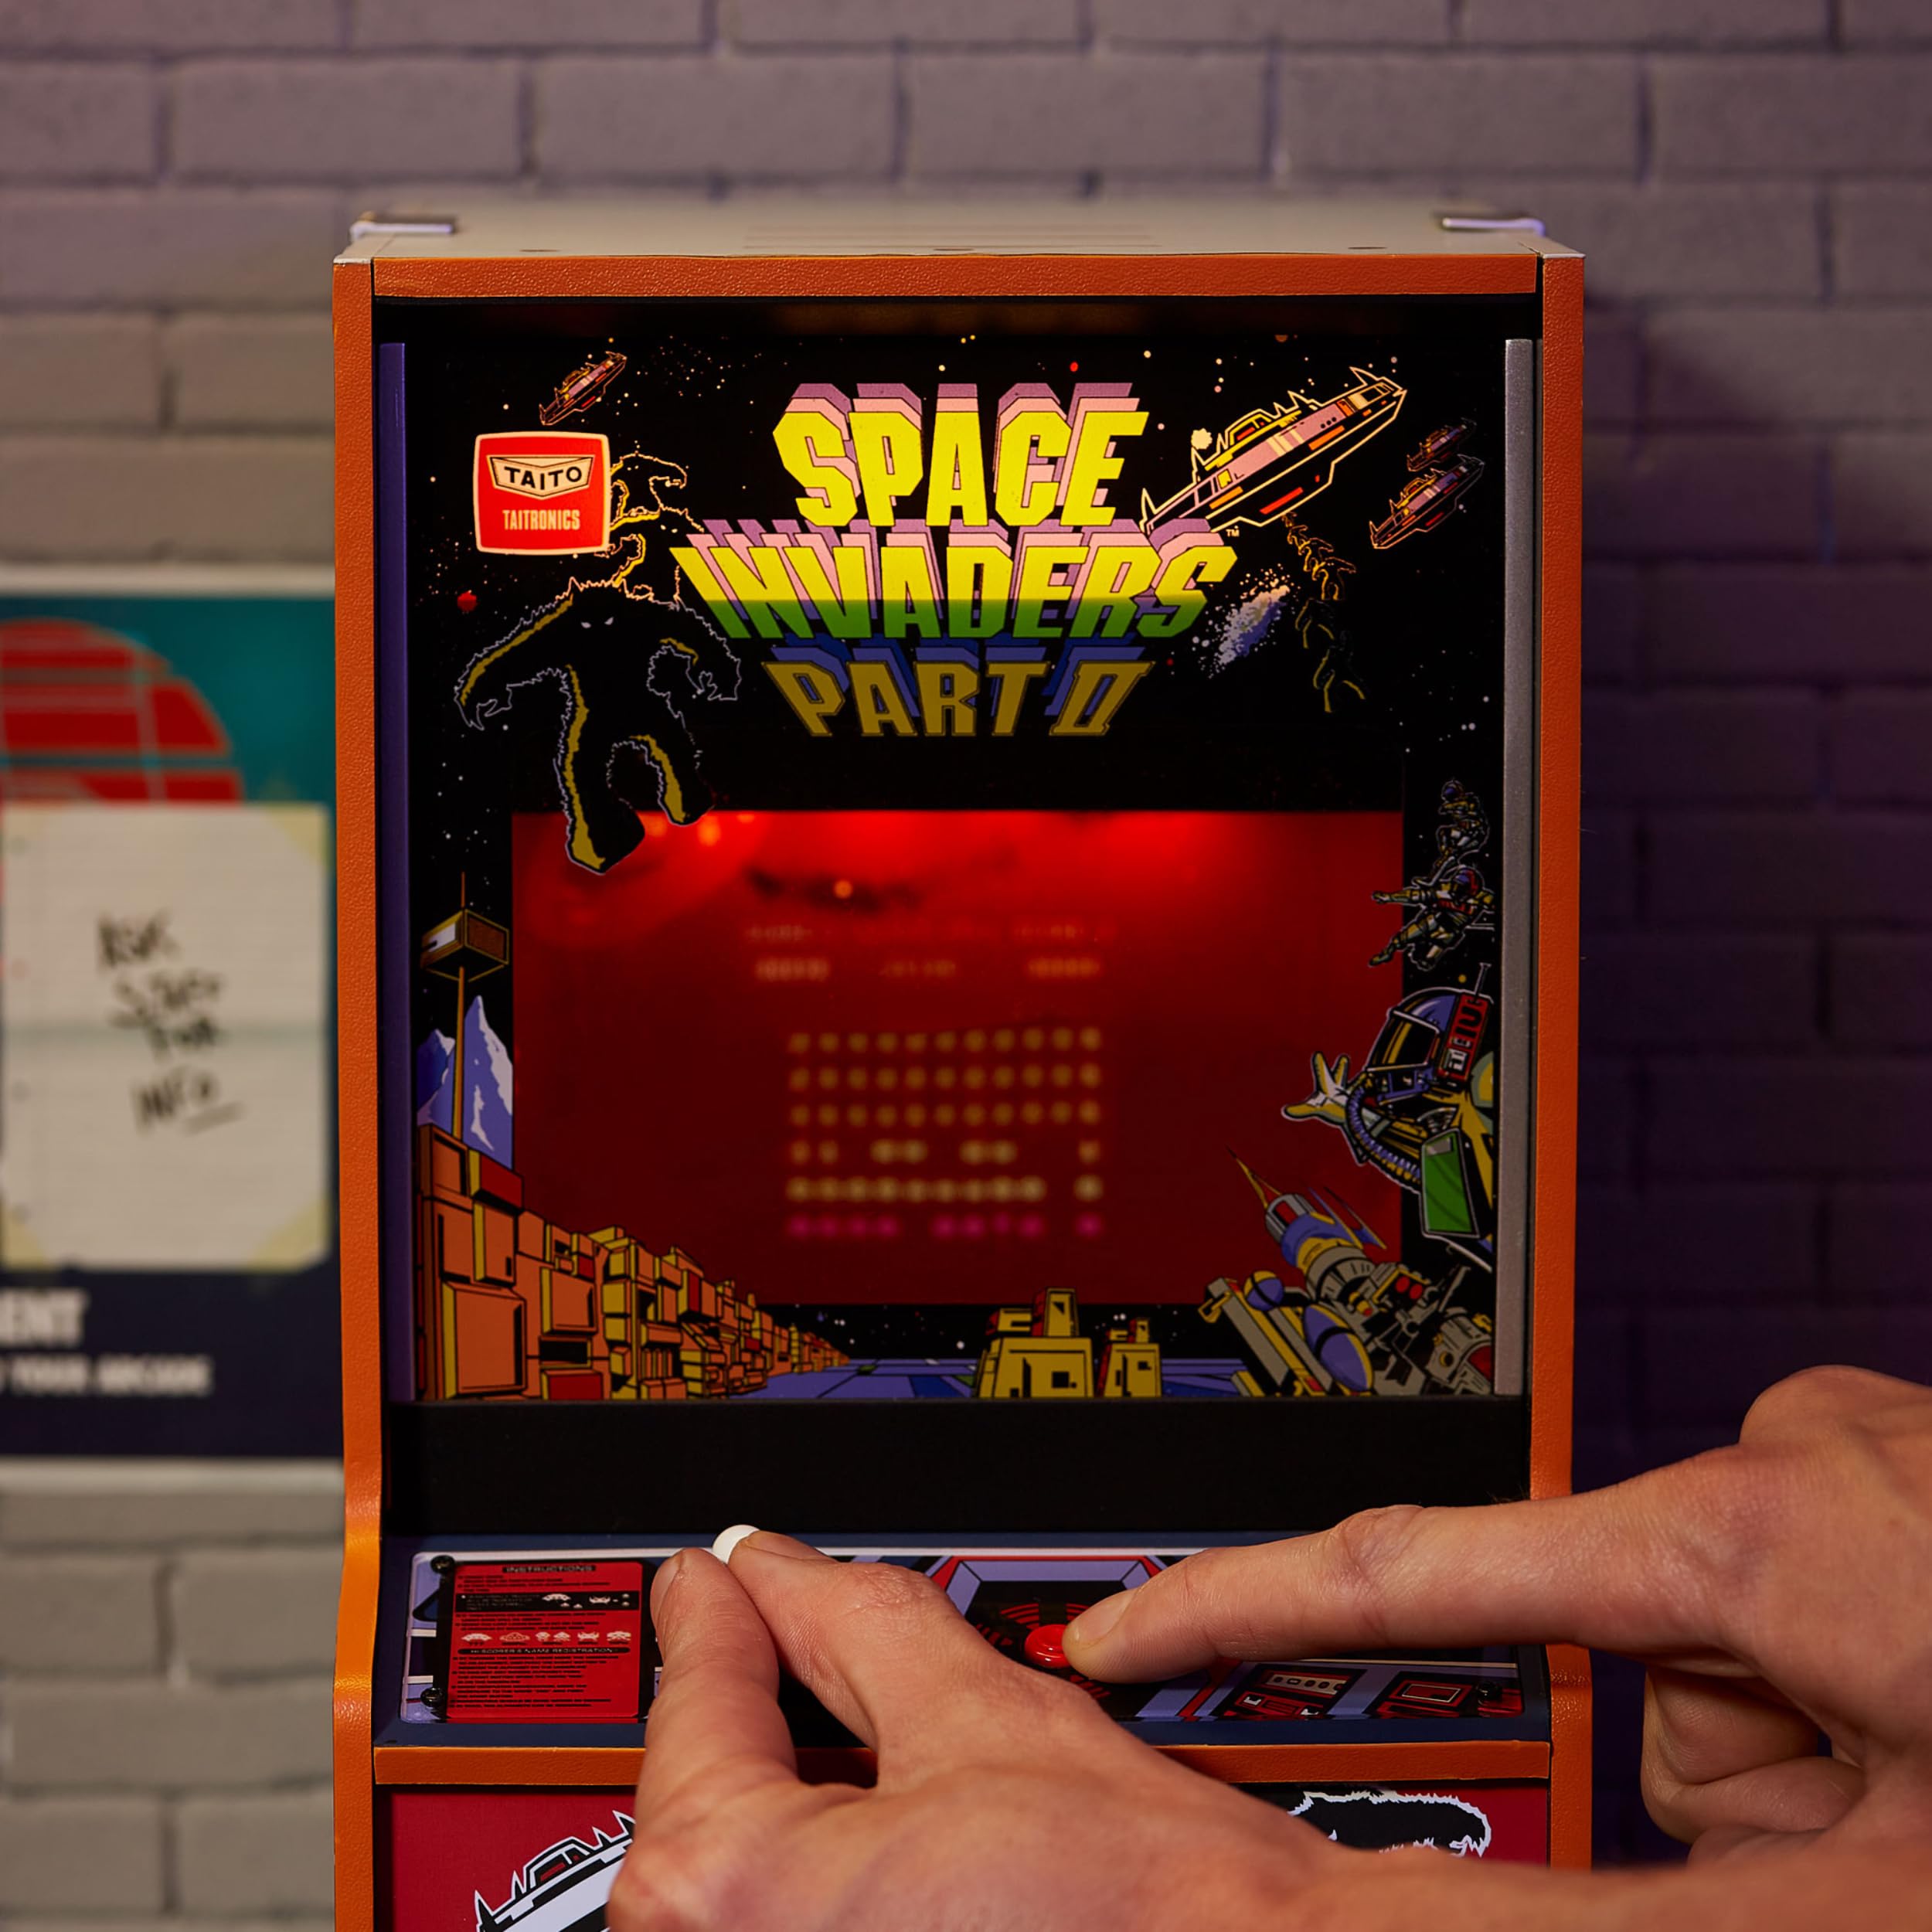 Quarter Arcades Official Space Invaders II 1/4 Sized Mini Arcade Cabinet by Numskull – Playable Replica Retro Arcade Game Machine – Micro Retro Console